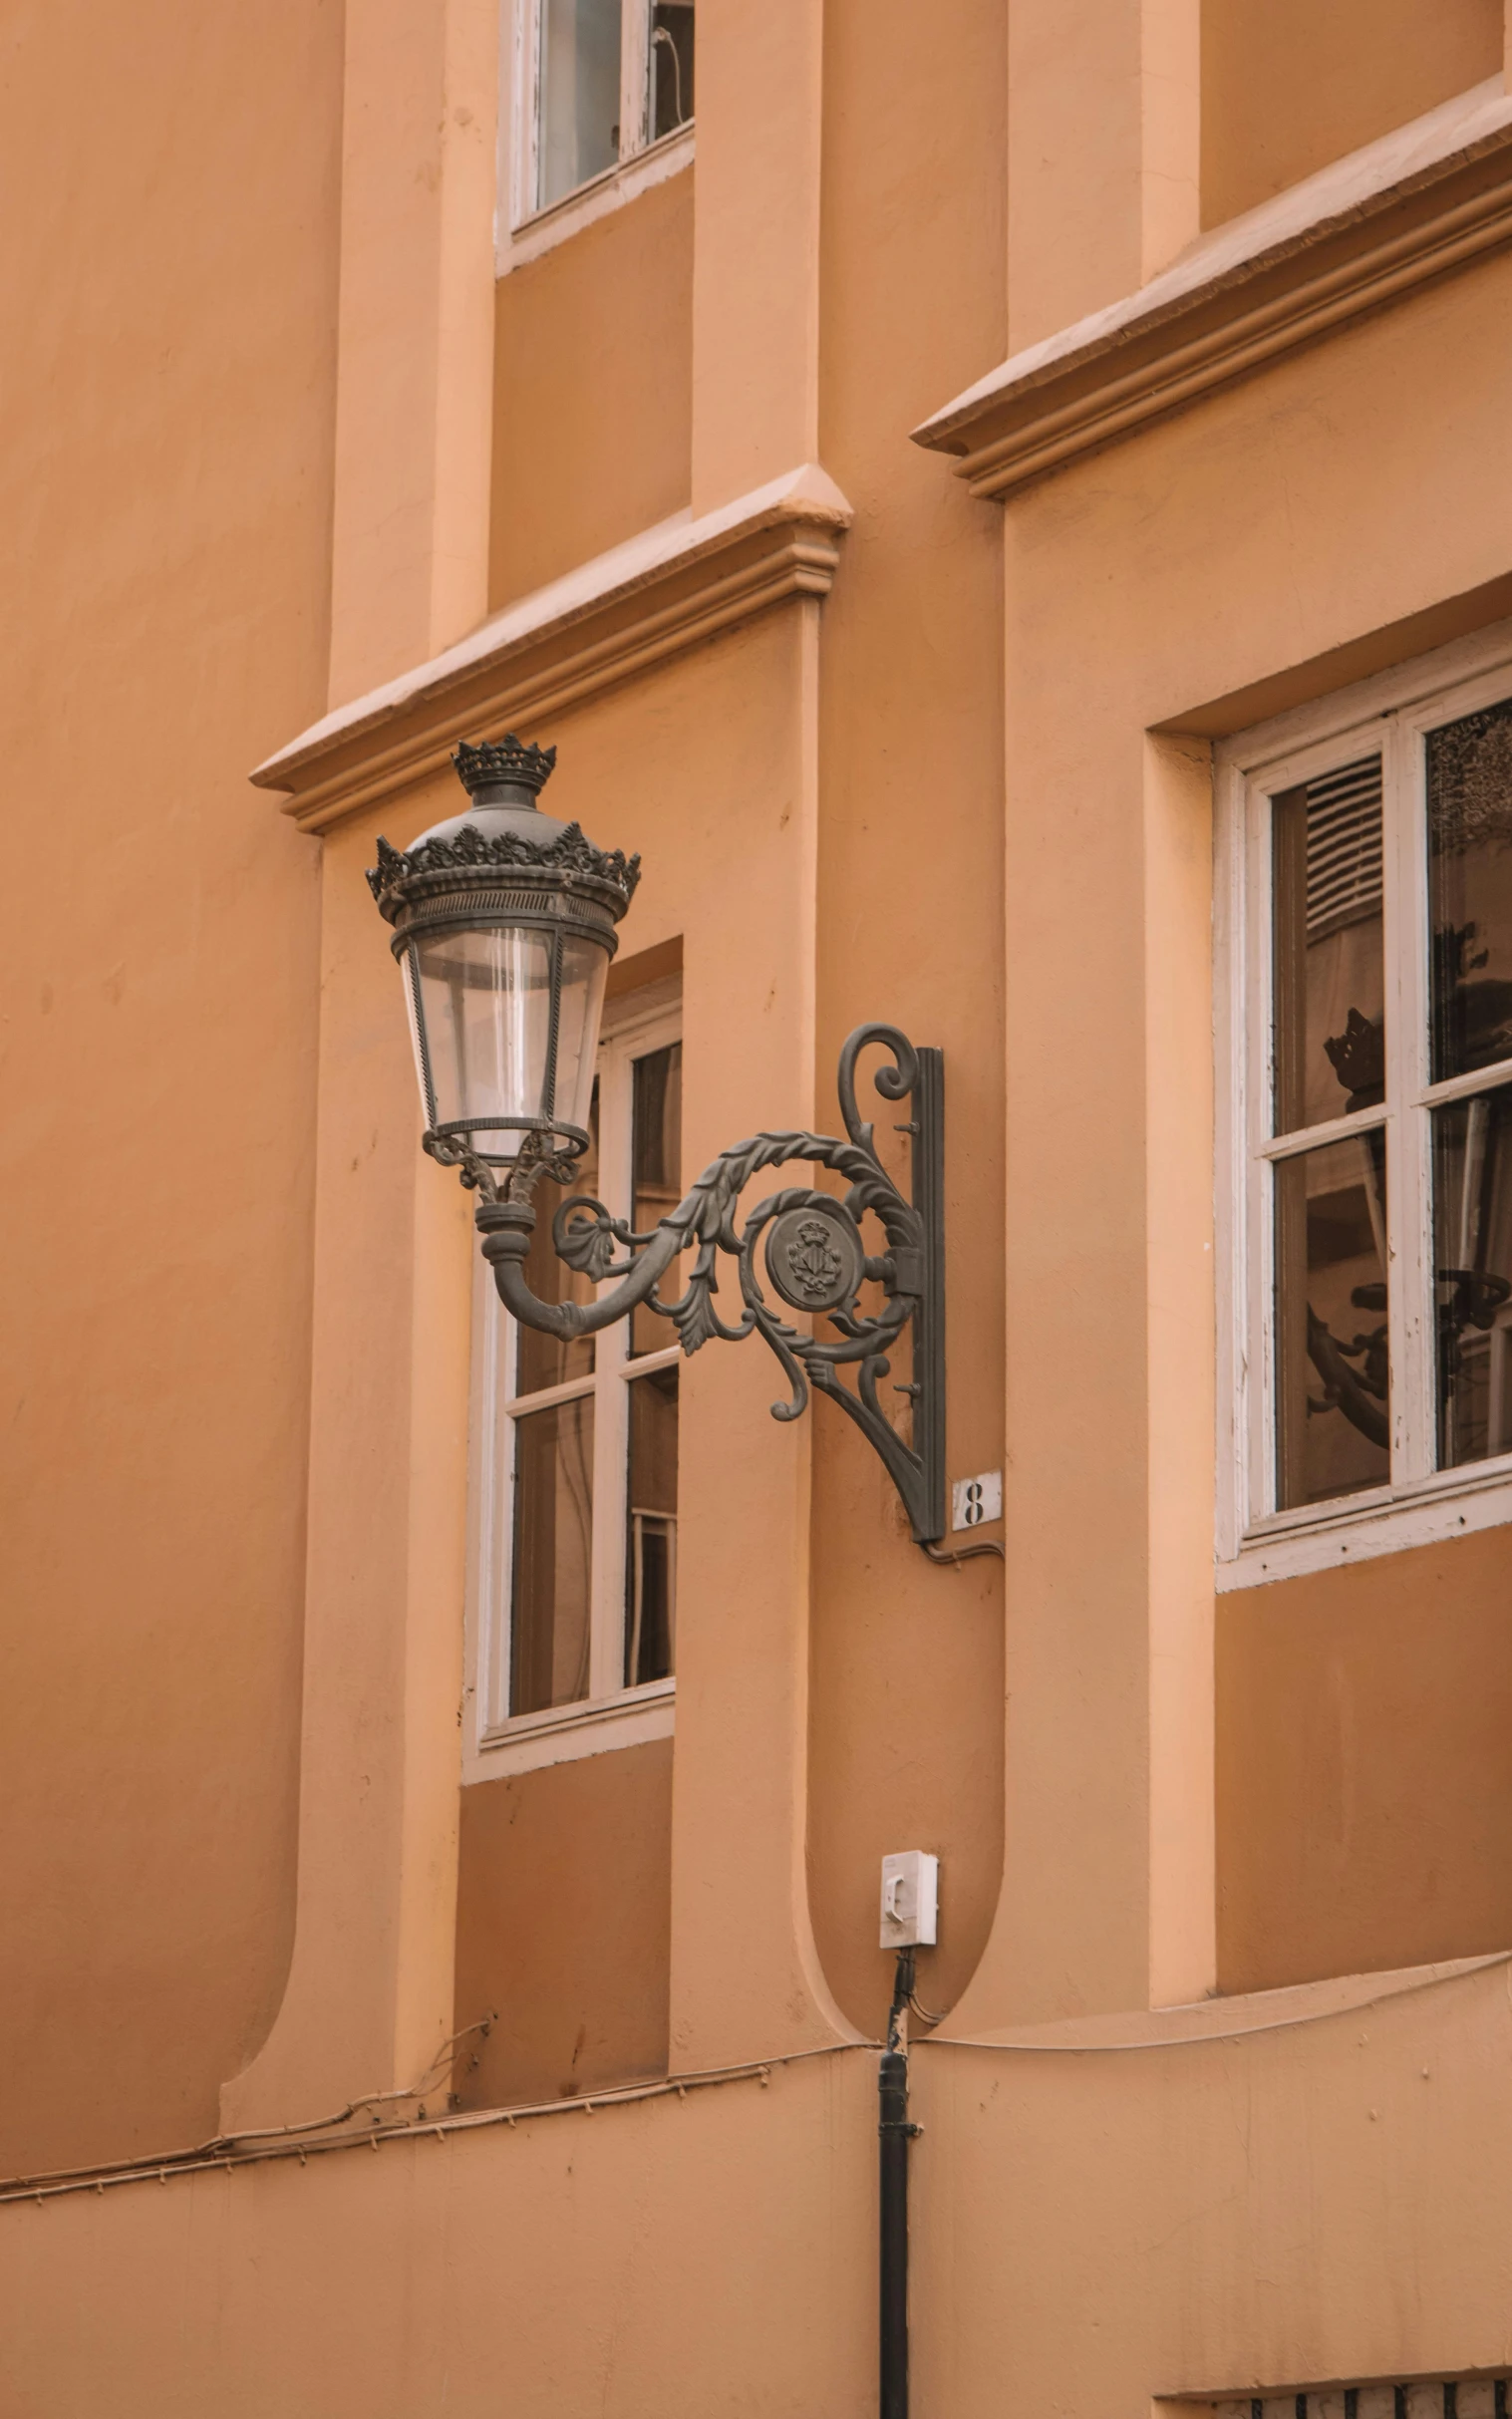 an old fashioned street light mounted to the side of a building